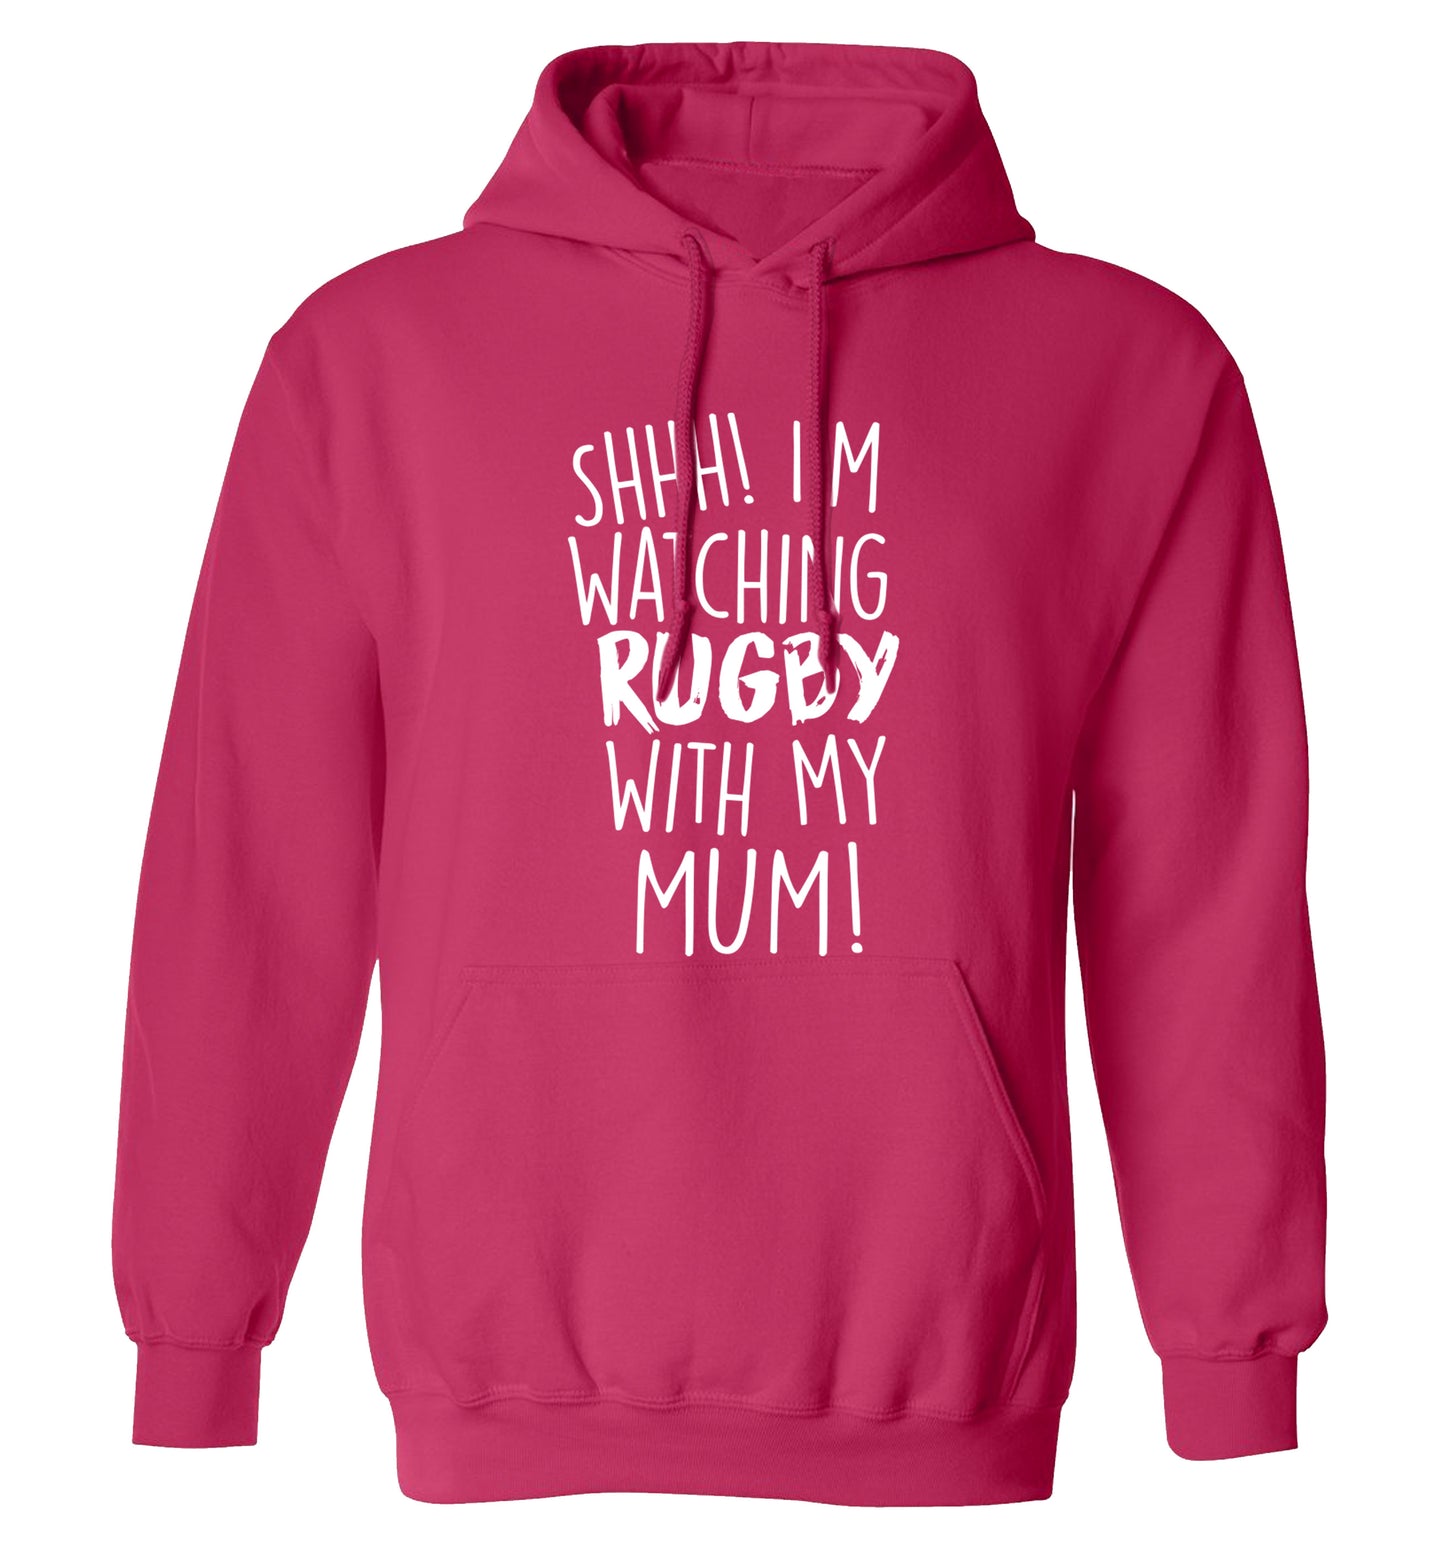 Shh... I'm watching rugby with my mum adults unisex pink hoodie 2XL